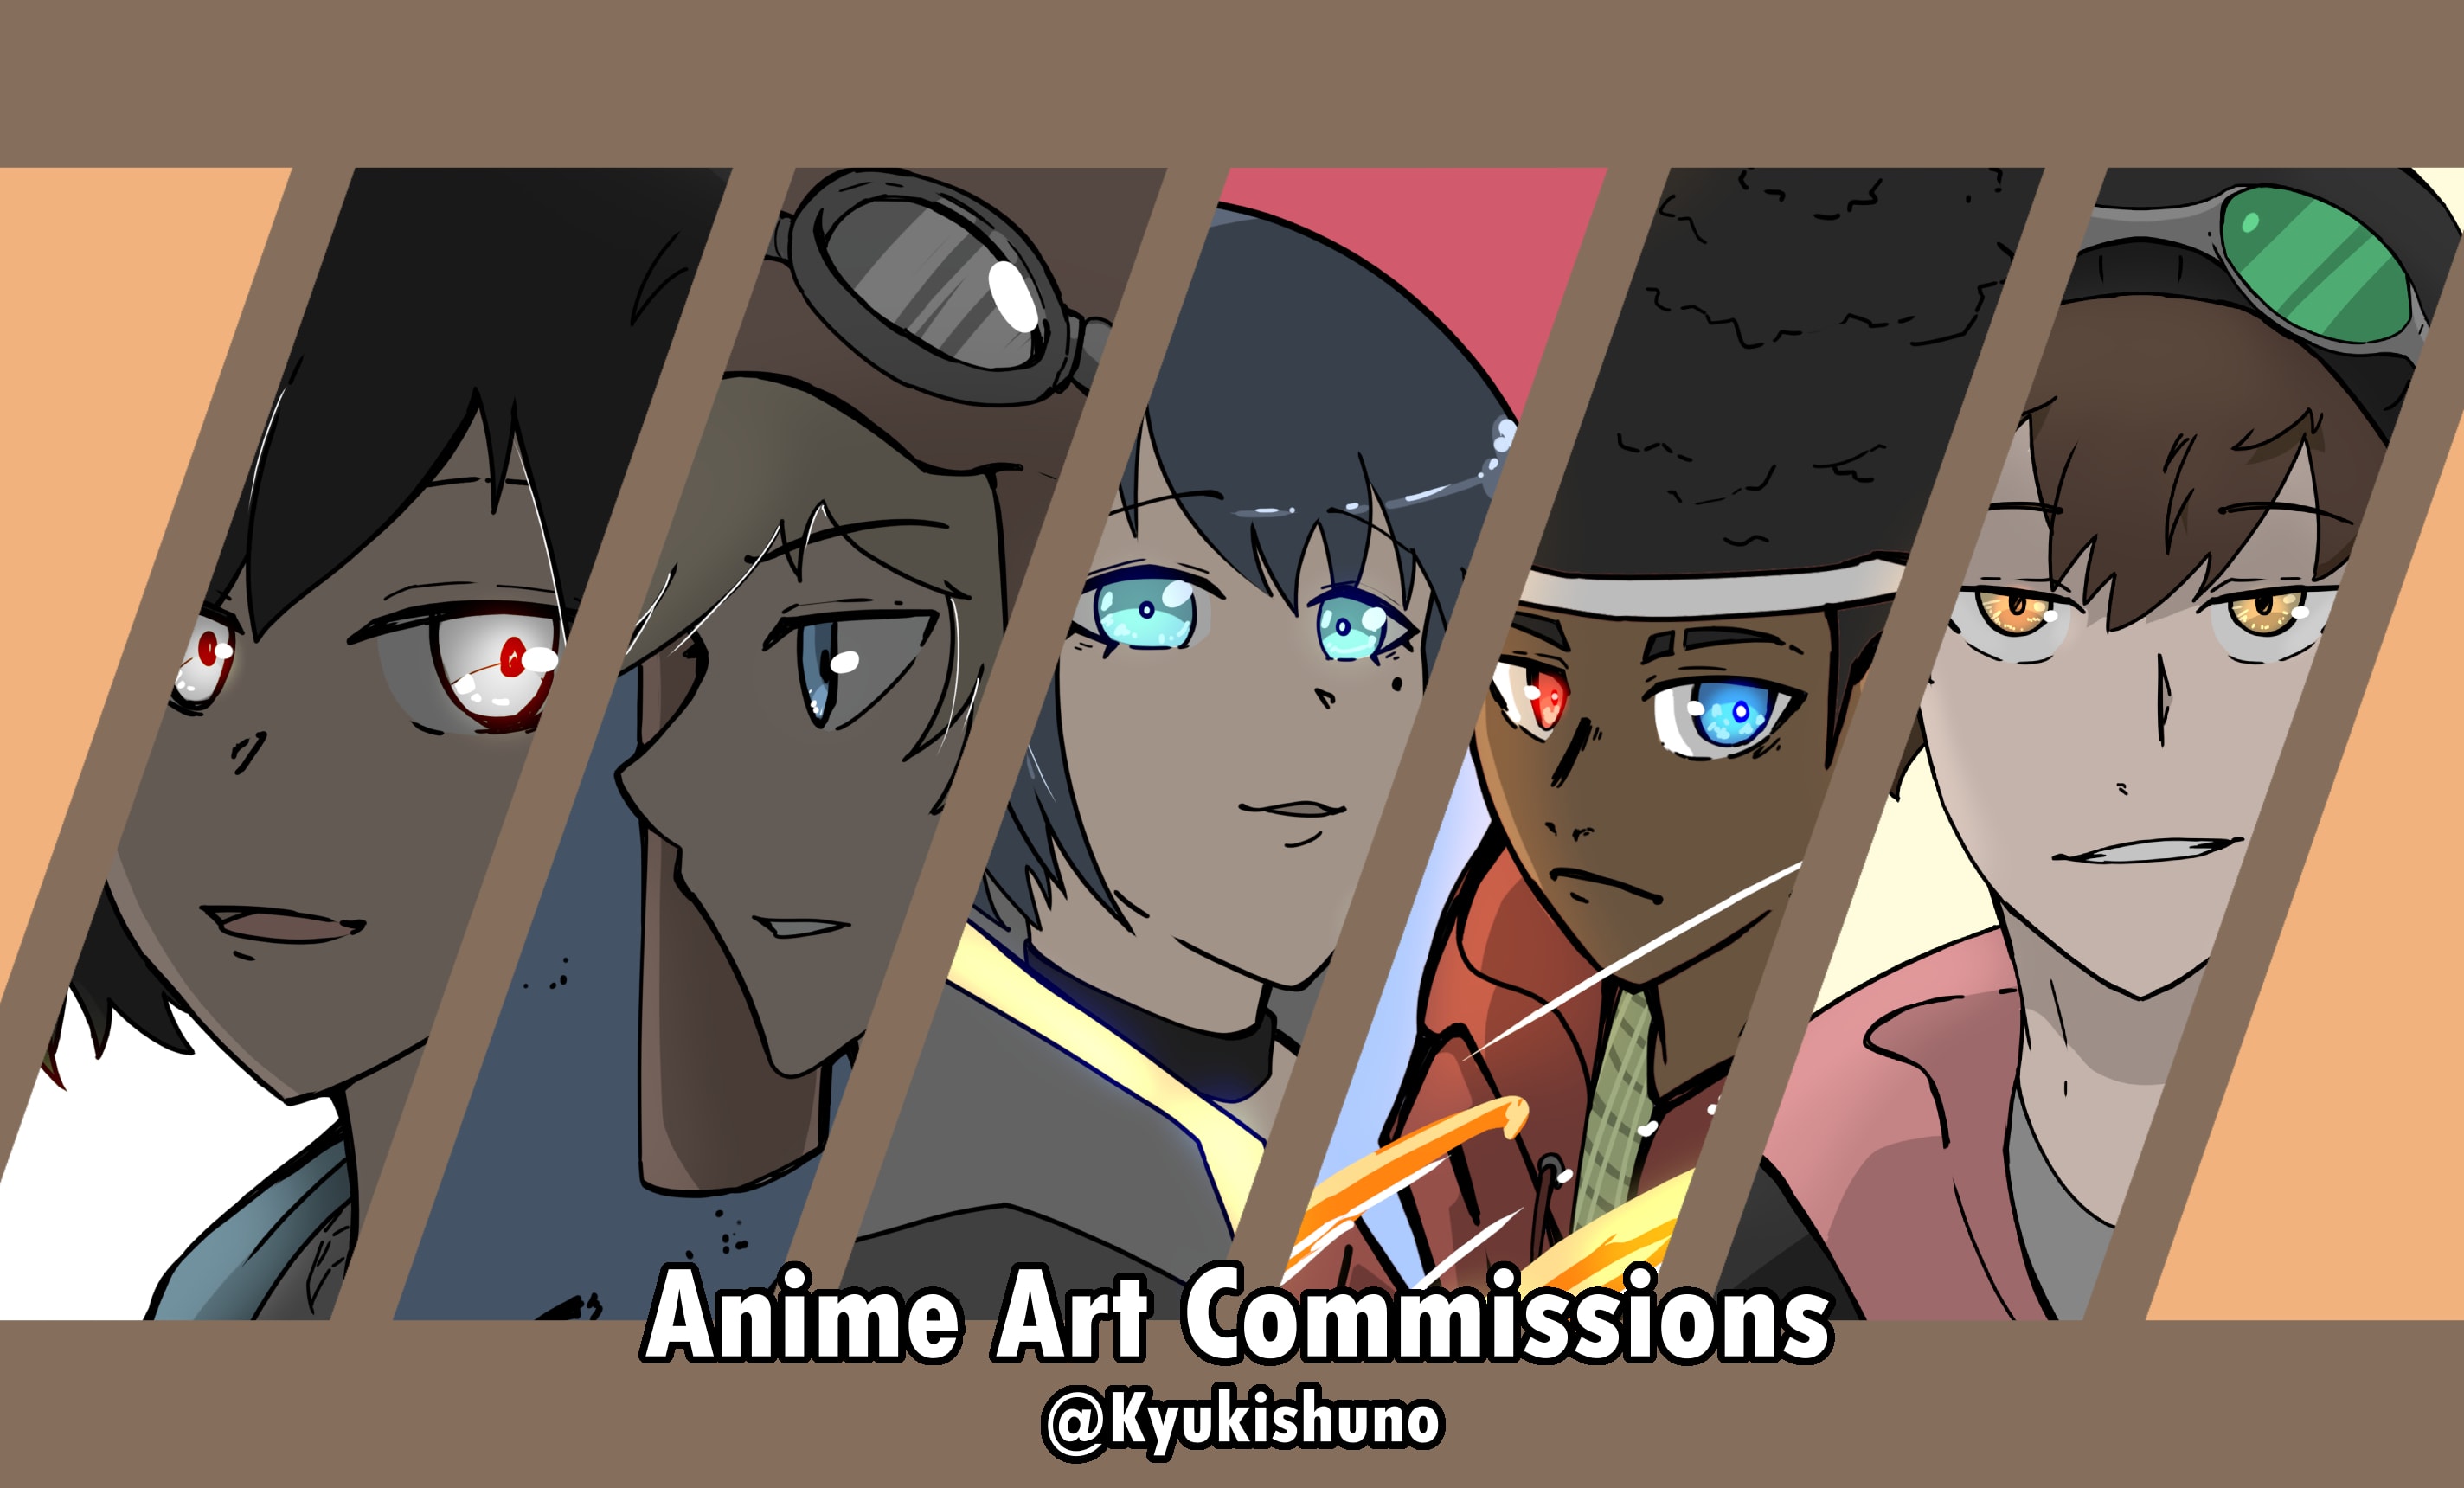 FOR HIRE] I make anime illustrations, fanart and OCS! Starting at